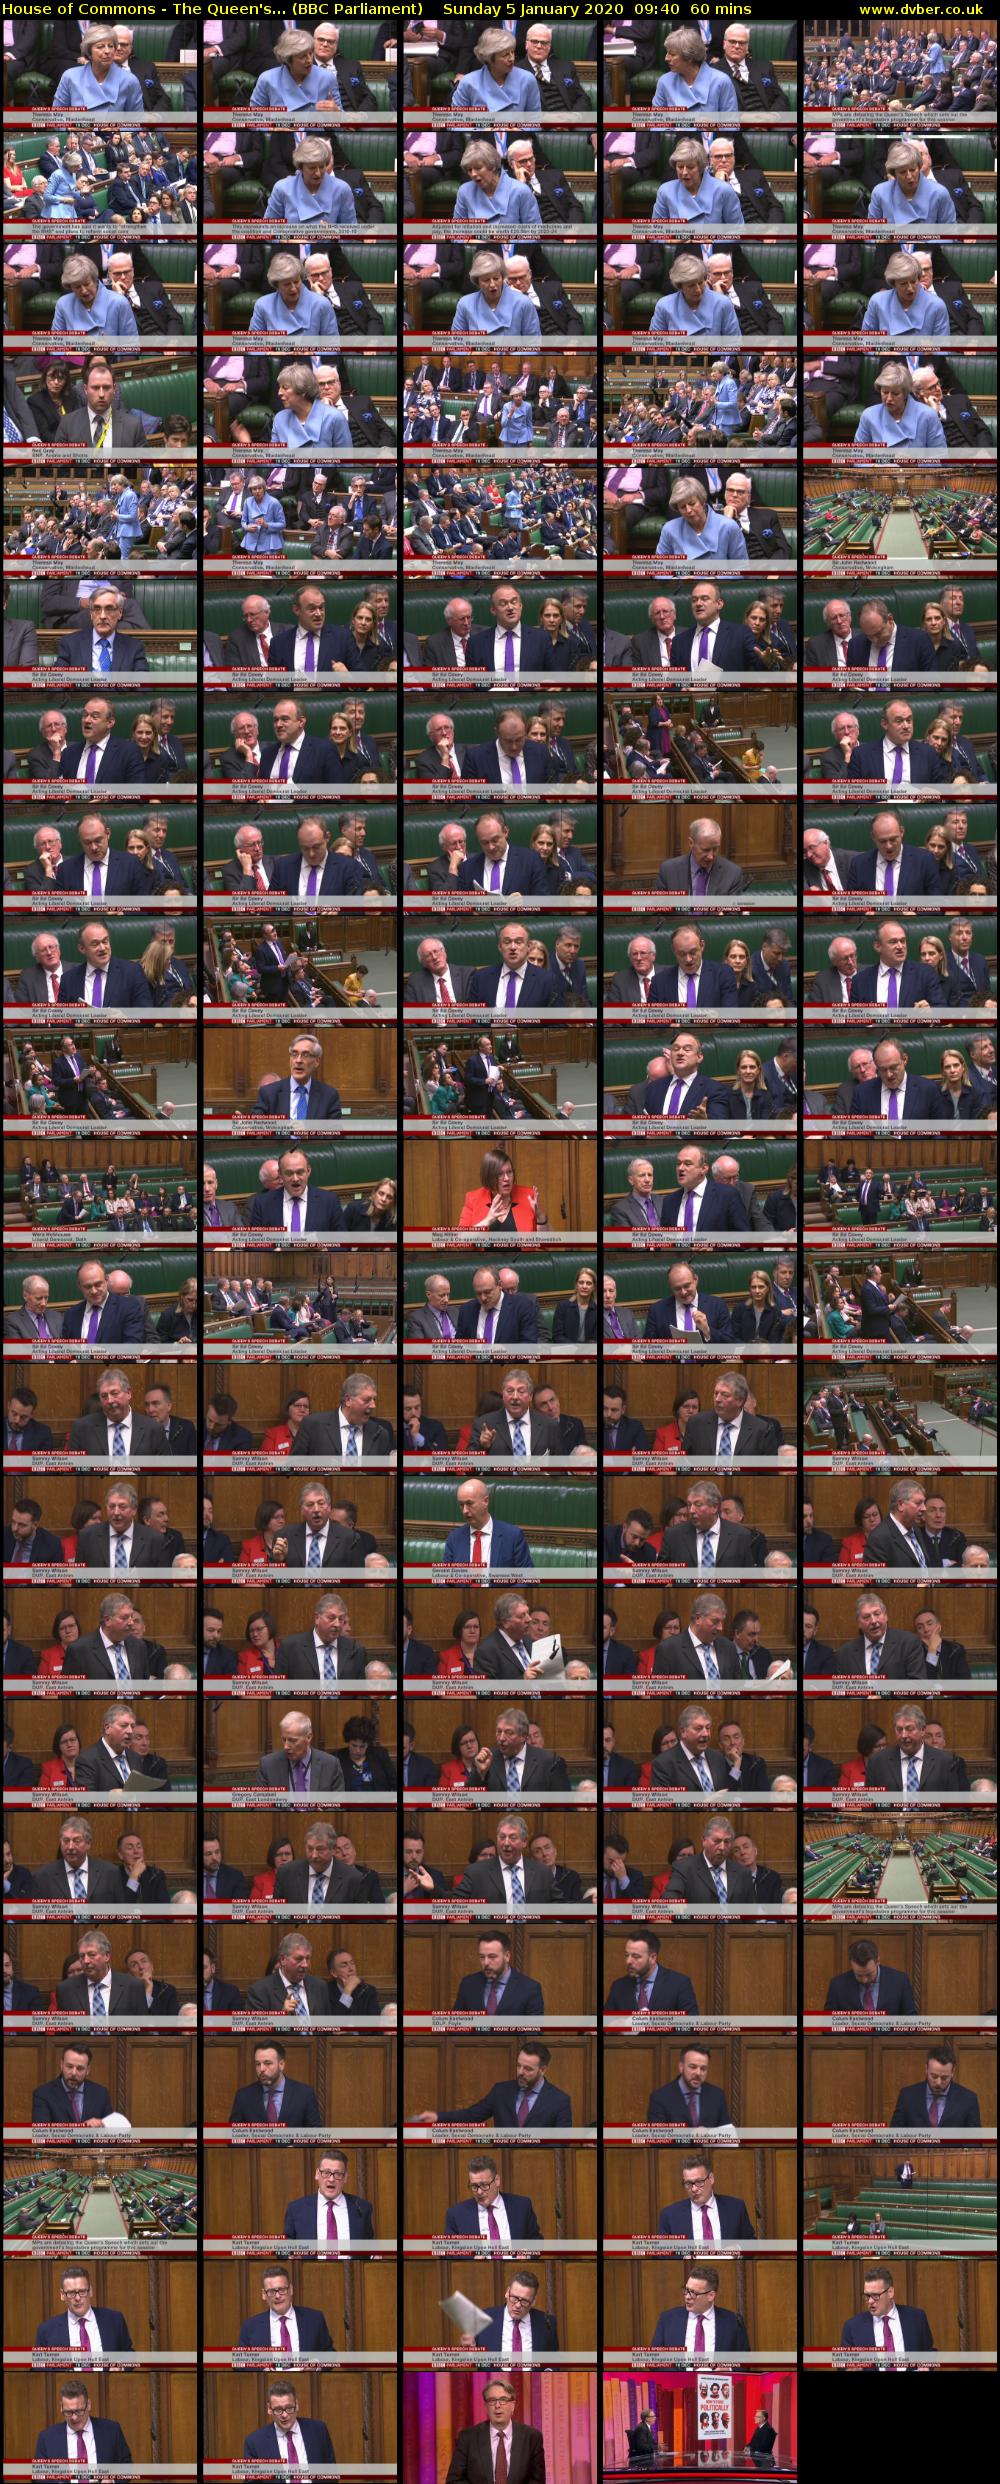 House of Commons - The Queen's... (BBC Parliament) Sunday 5 January 2020 09:40 - 10:40